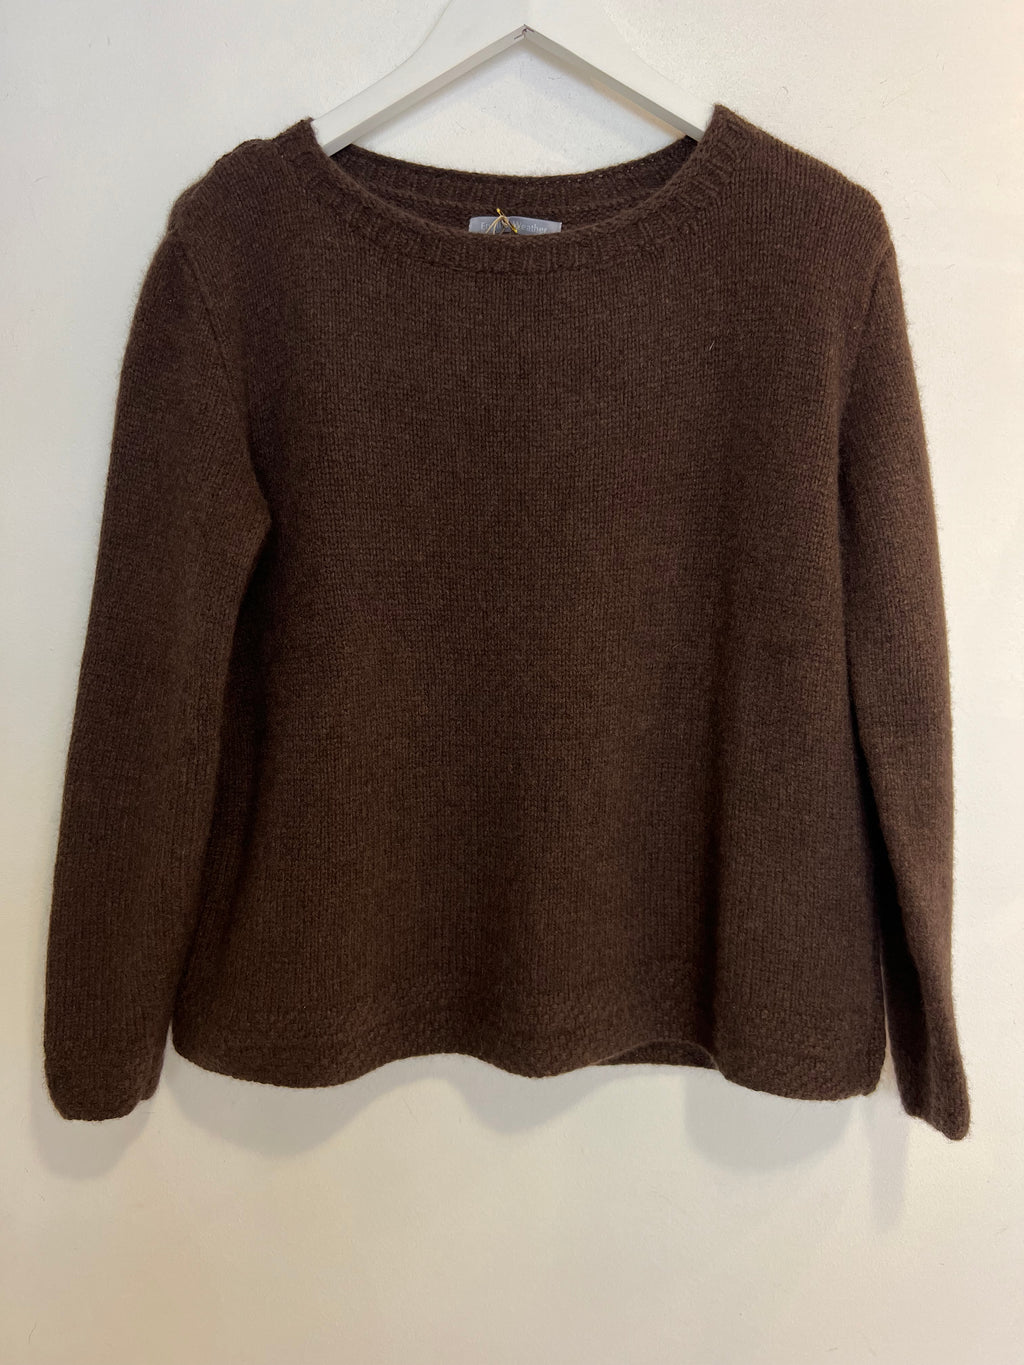 Hetre Alresford Hampshire Clothes Store English Weather Peat Guernsey Sweater